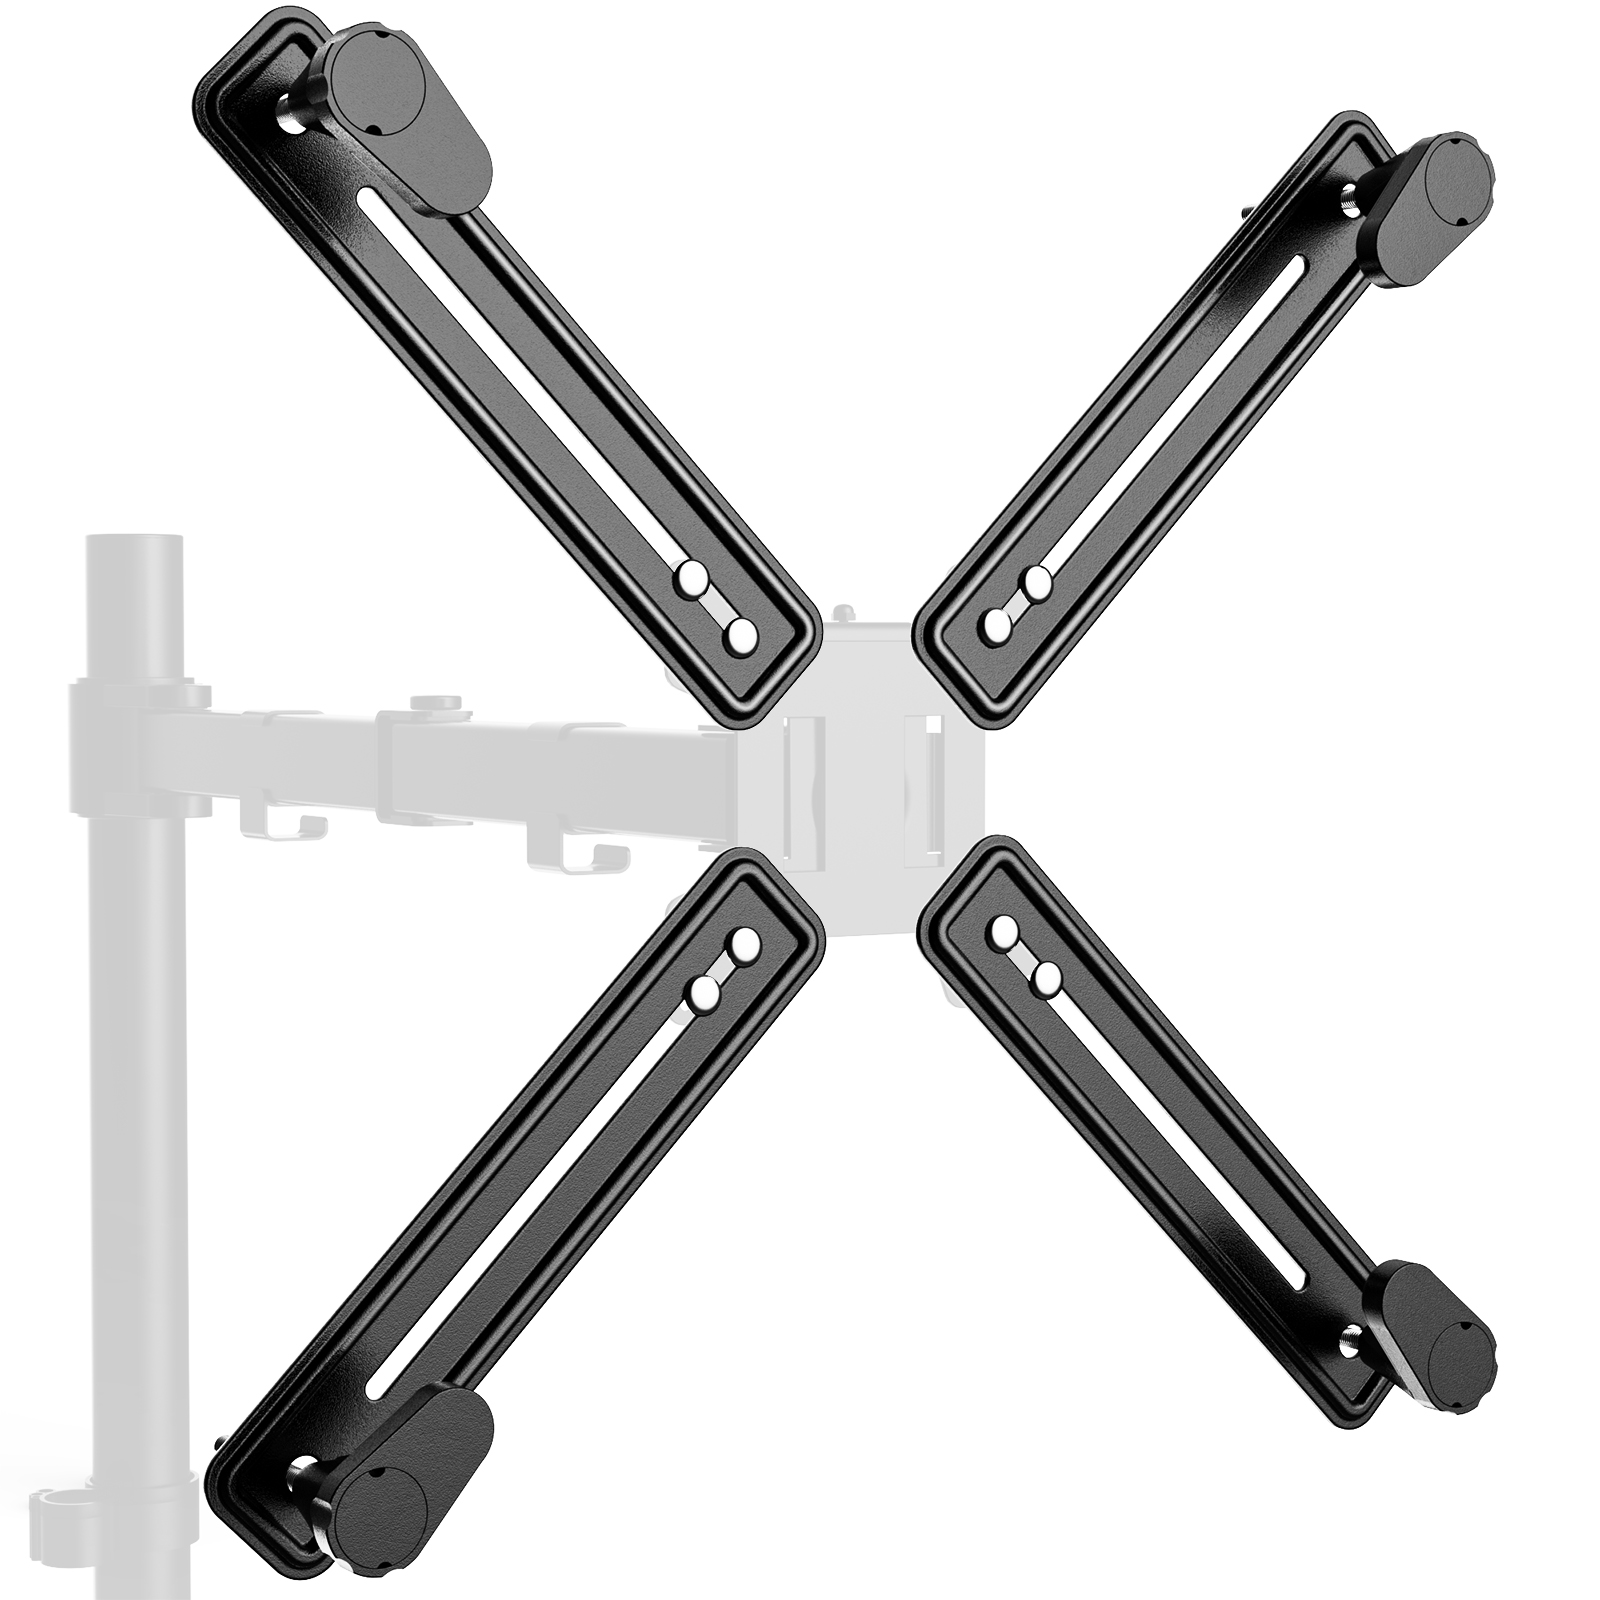 WALI Mount Bracket Adapter Monitor Arm Mounting Kit for Screen 13 to 27 inch, Mounting Holes 75mm and 100mm (UVVEP) - image 1 of 9